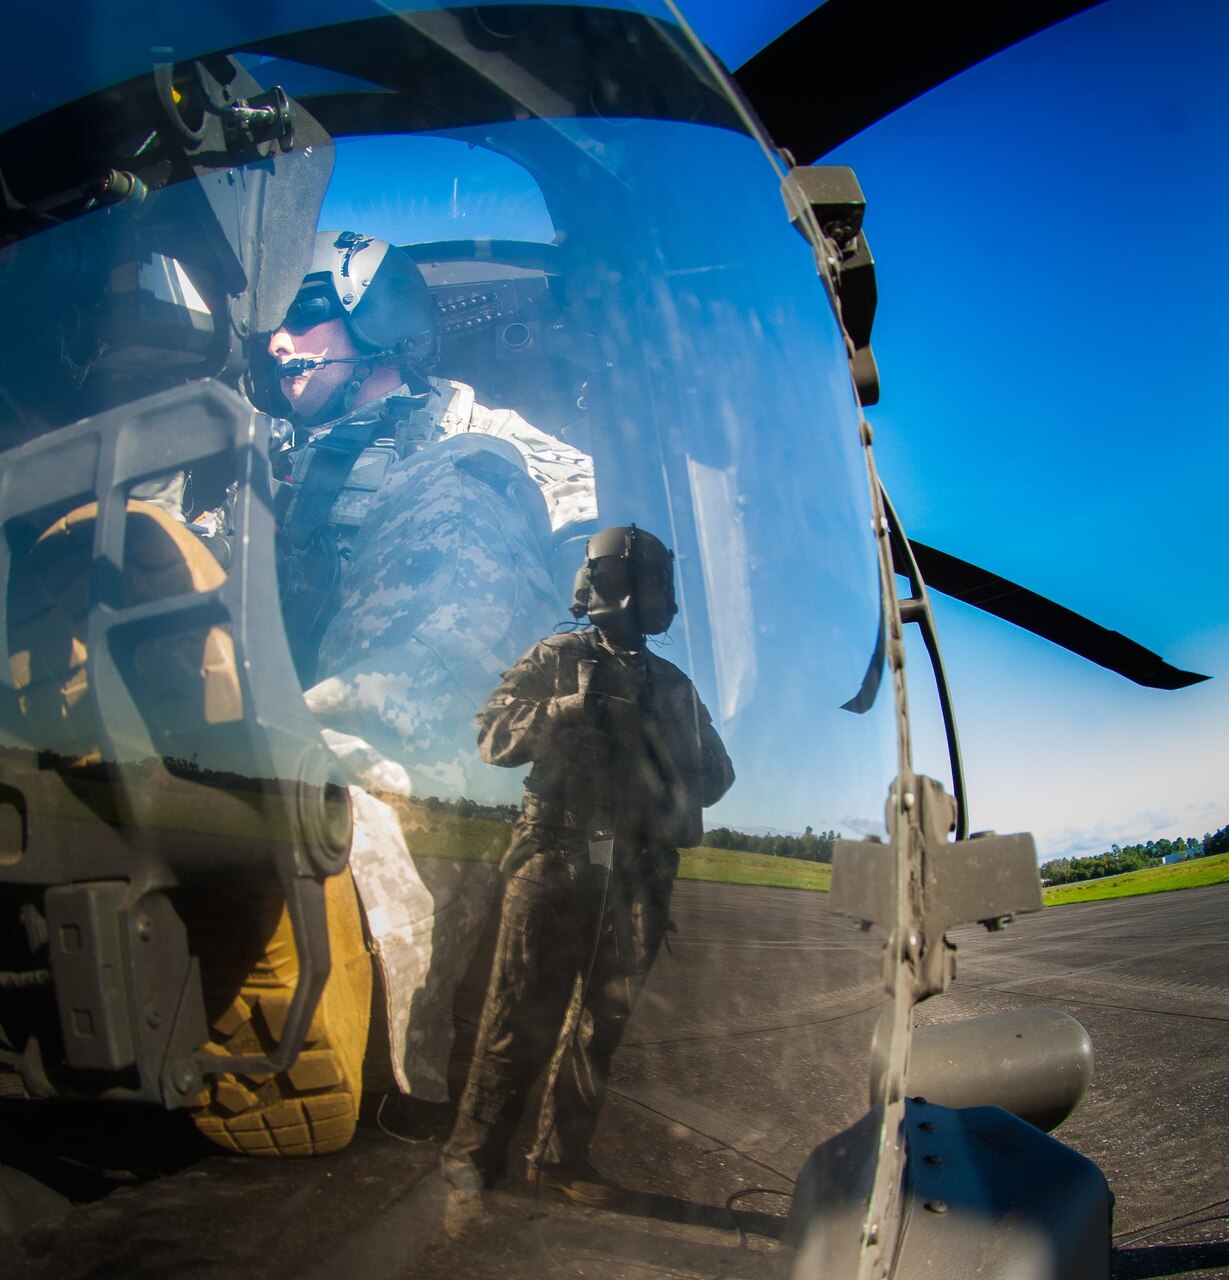 U.S. soldiers, assigned to Special Operations Detachment - C, conduct airborne operations from a UH-60 Black Hawk helicopter piloted by a Florida National Guard helicopter crew in Brooksville, Fla., April 23, 2016. Army photo by Ching Oettel